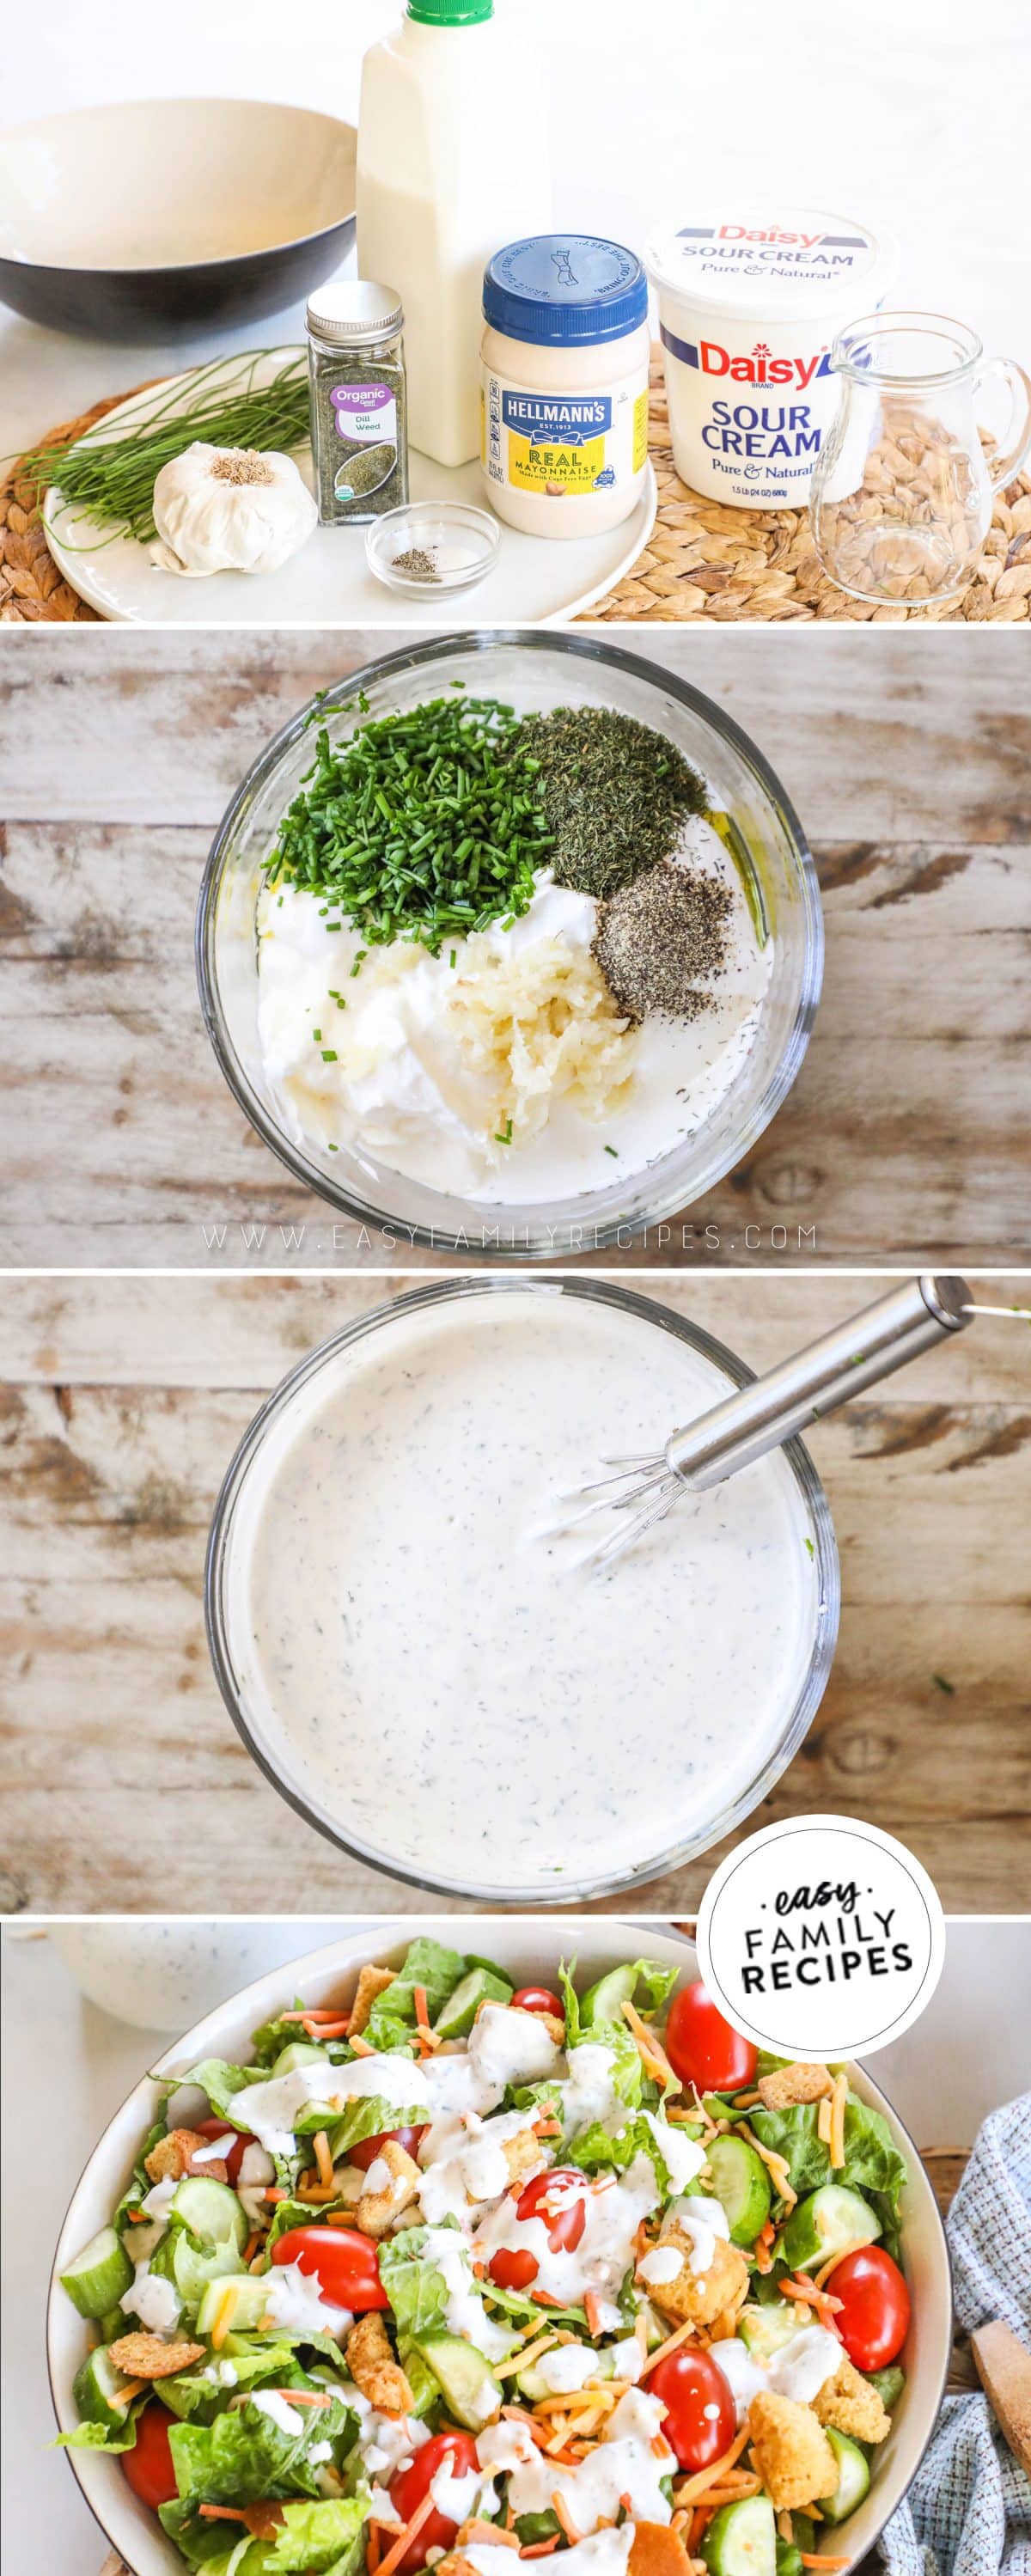 Process photos for how to make homemade buttermilk dressing: 1. Gather the ingredints. 2. Add all ingredients to a mixing bowl. 3. Whisk the dressing well until everything is combined. 4. Drizzle dressing over salad.